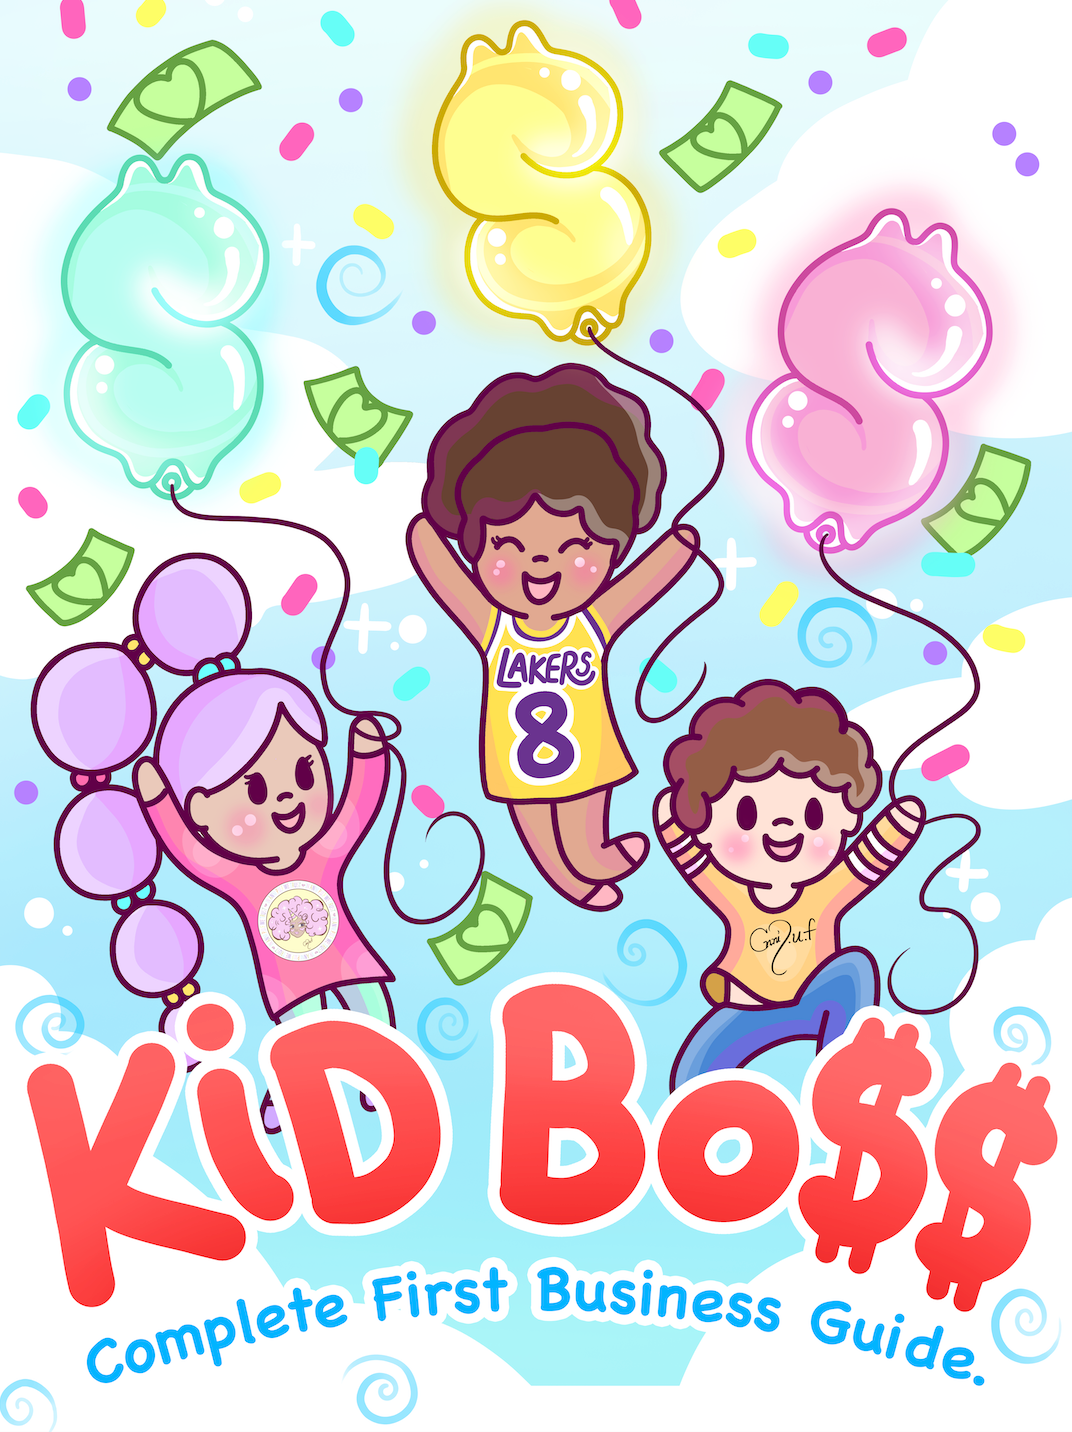 KID BO$$ Complete First Business Guide for young entrepreneurs